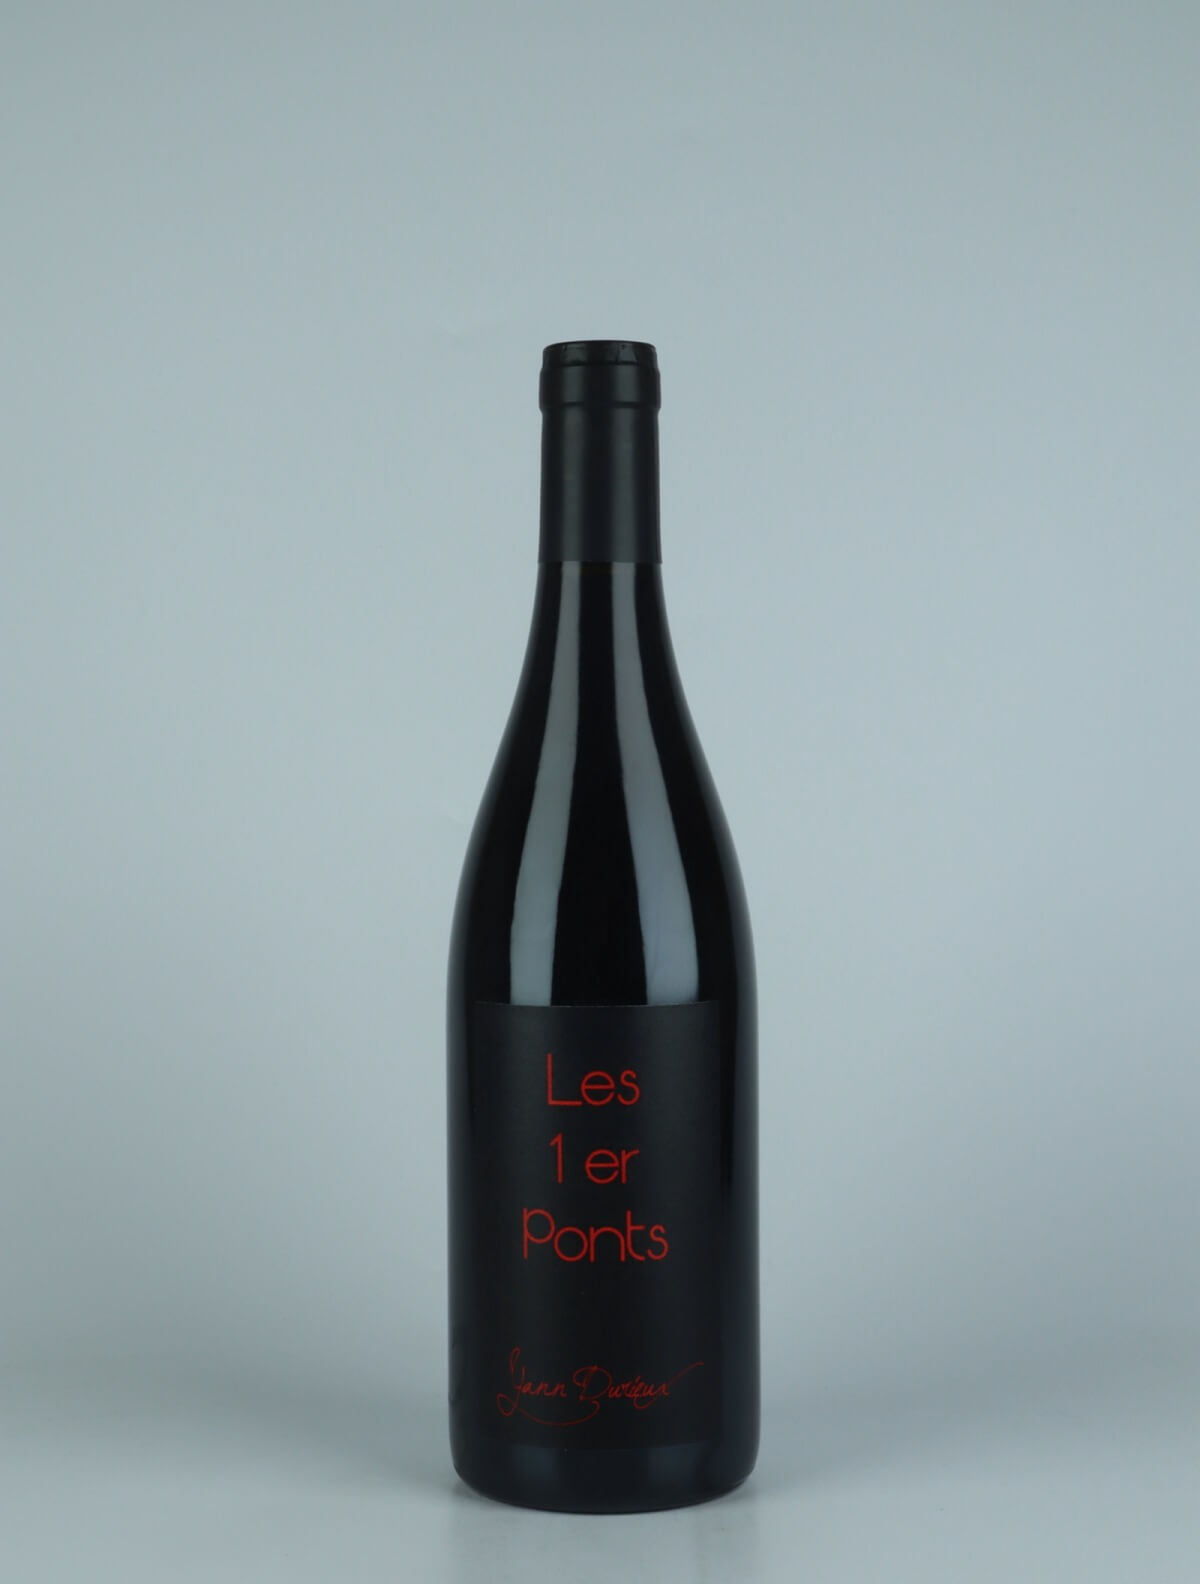 A bottle 2019 Les 1er Ponts Red wine from Yann Durieux, Burgundy in France